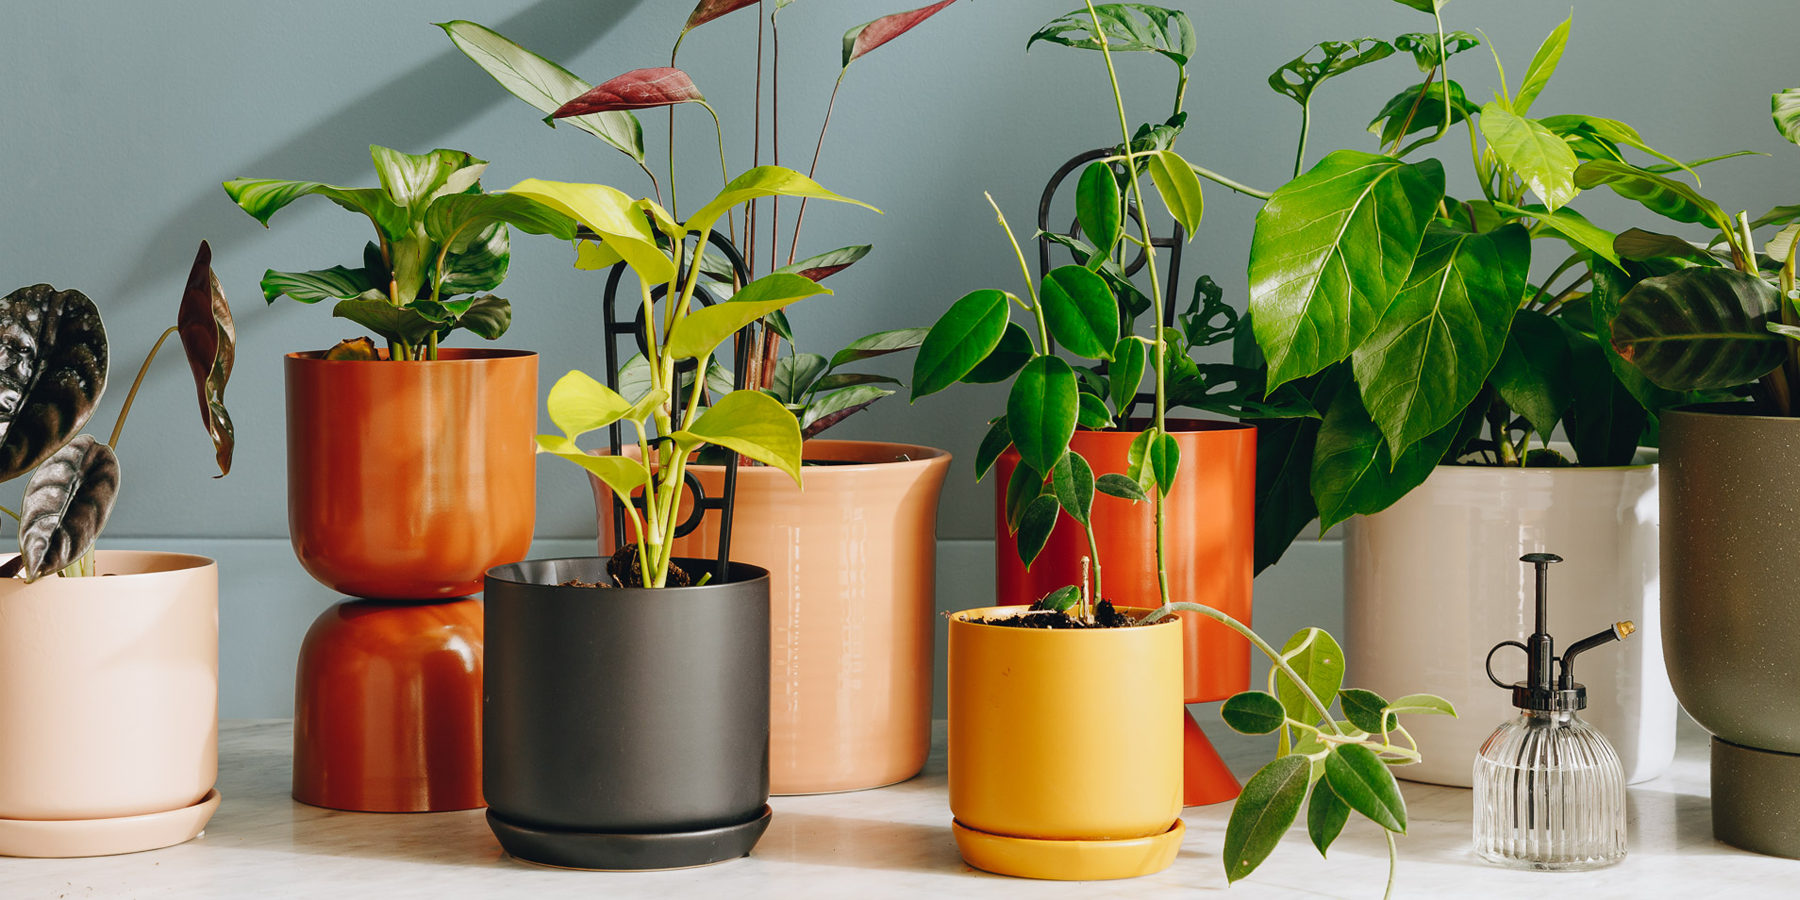 HOW TO STYLE POT PLANTS